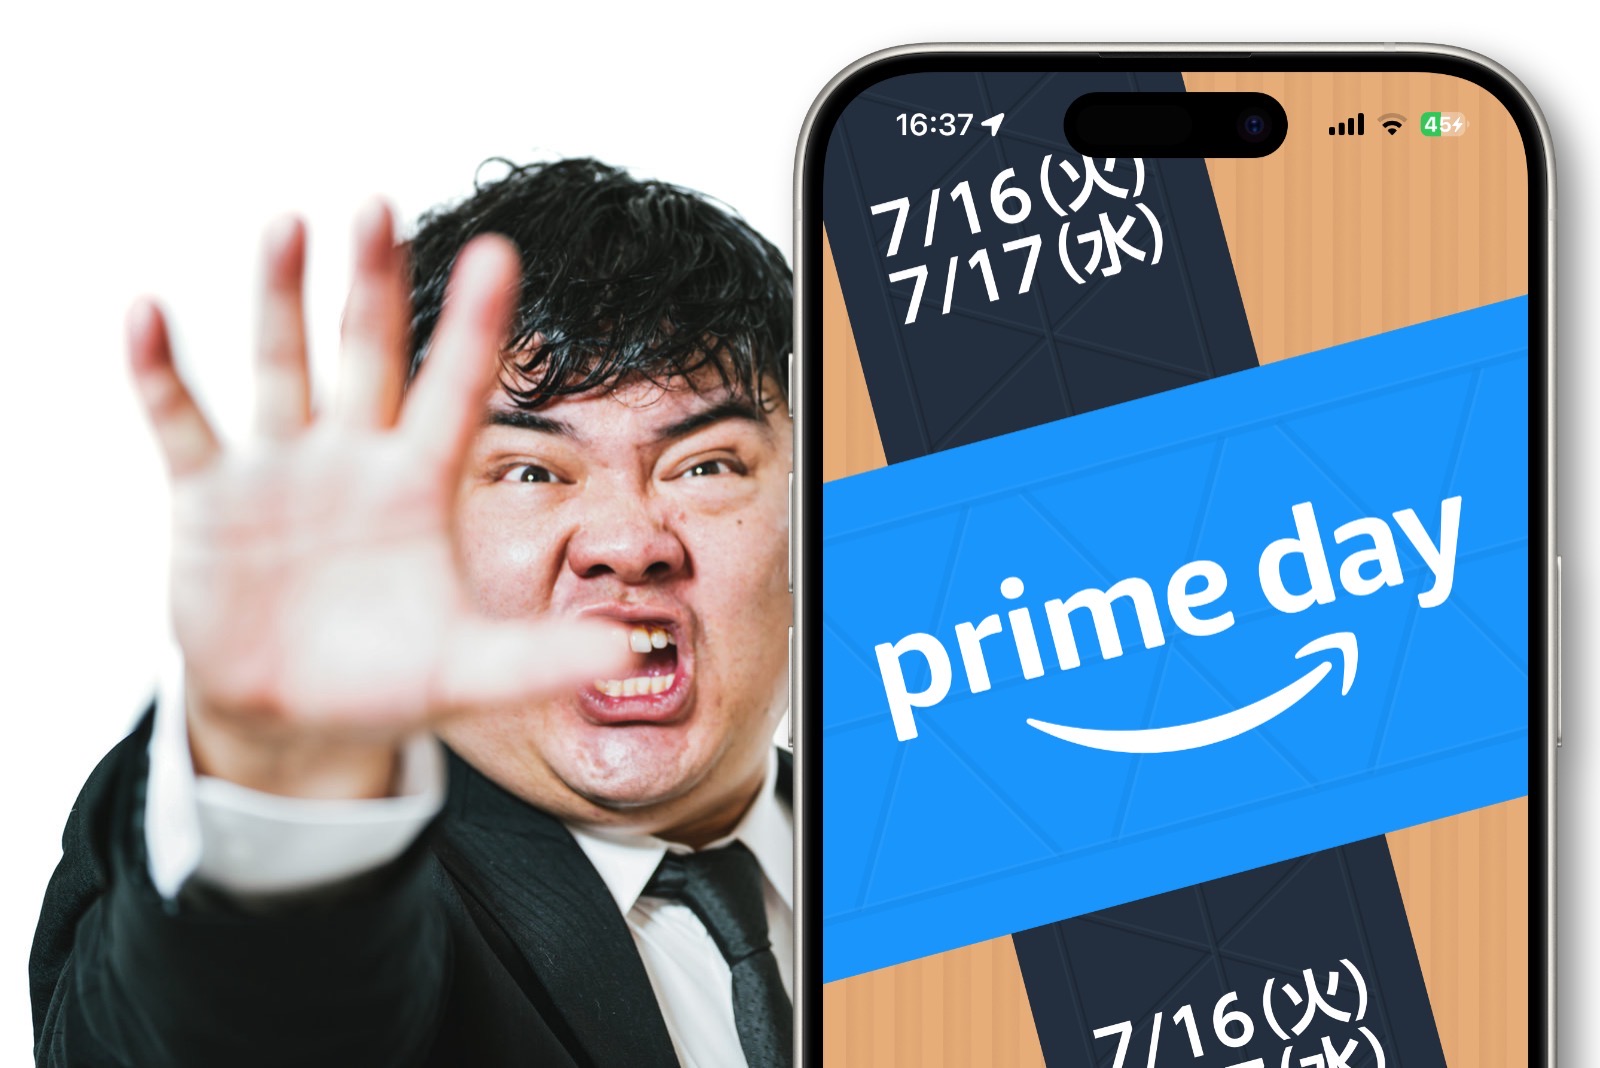 Wait for prime day